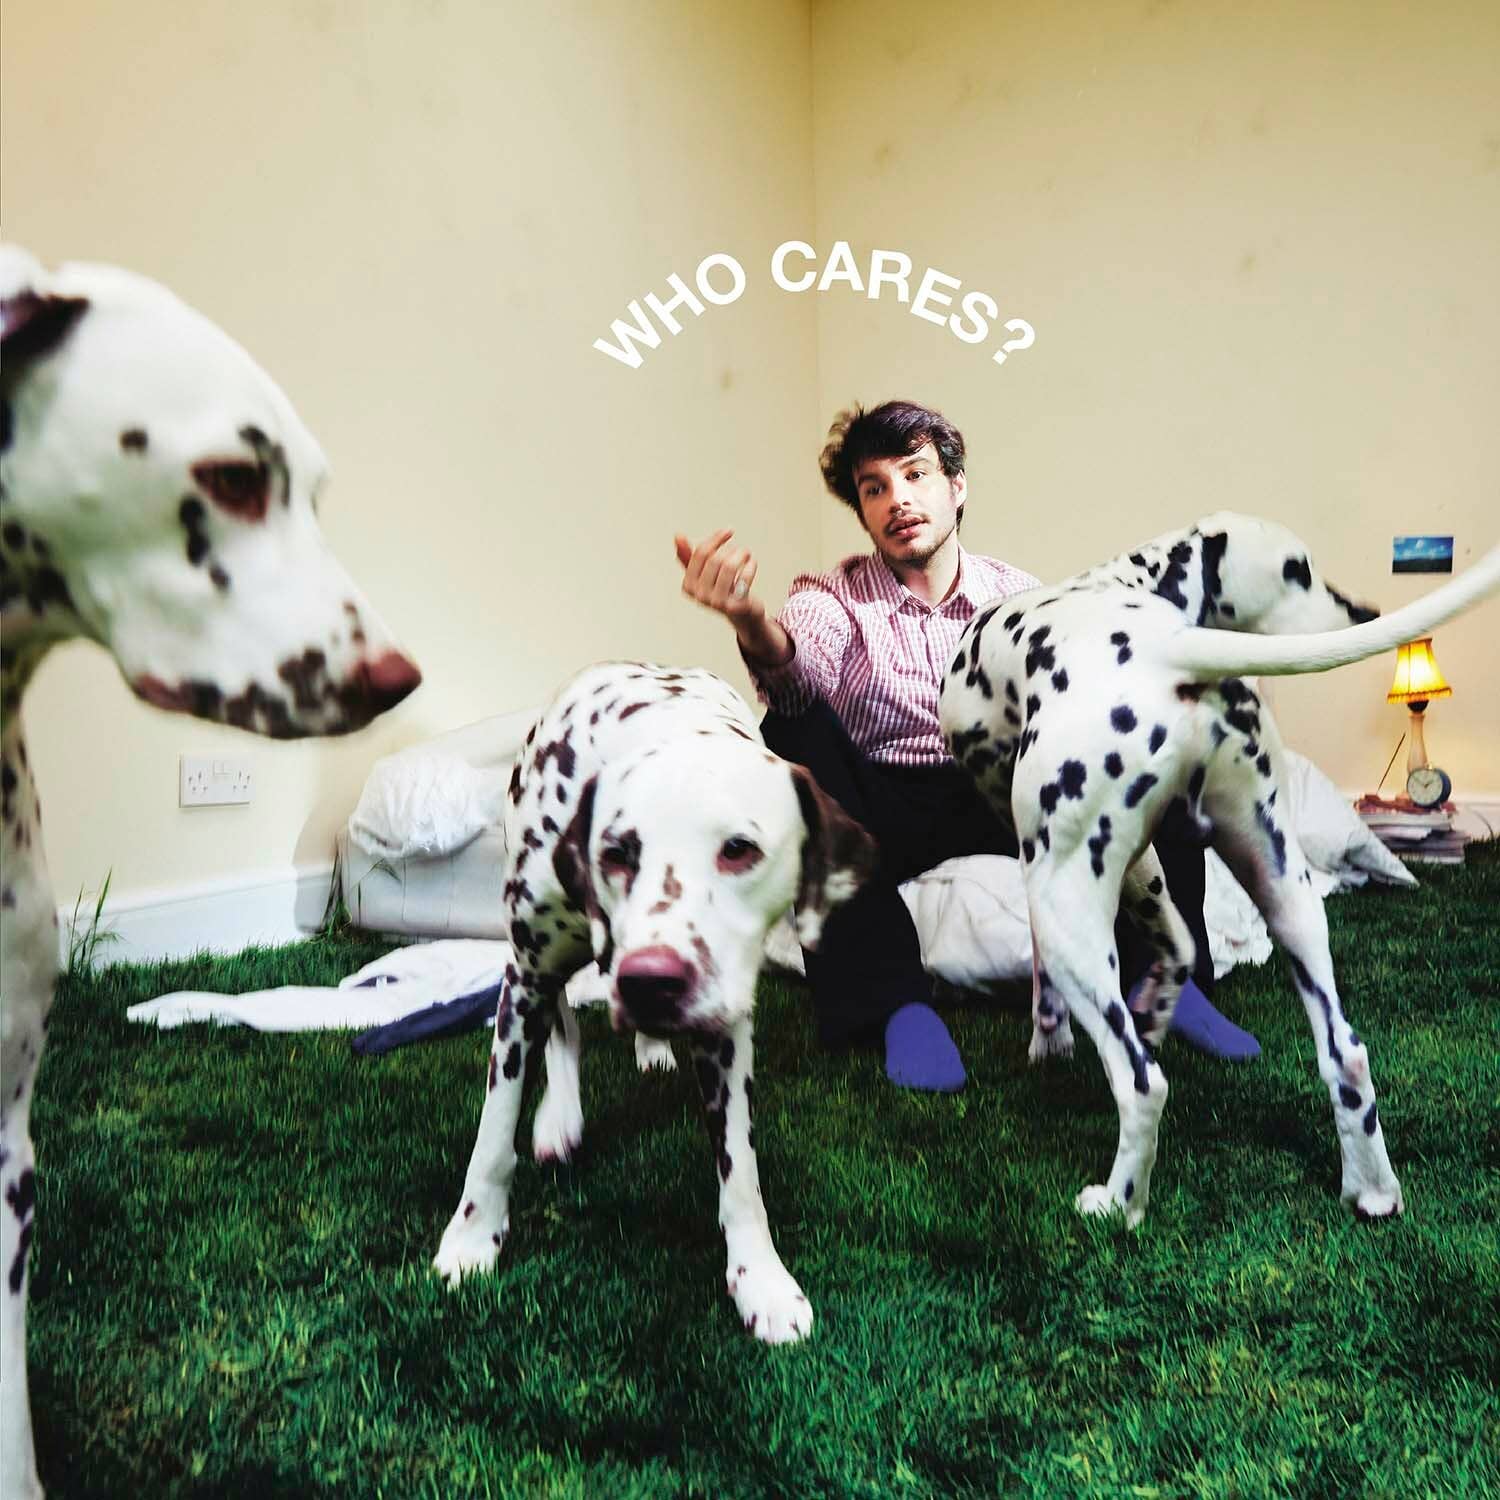 Rex Orange County doesn't care what you call him (anymore)